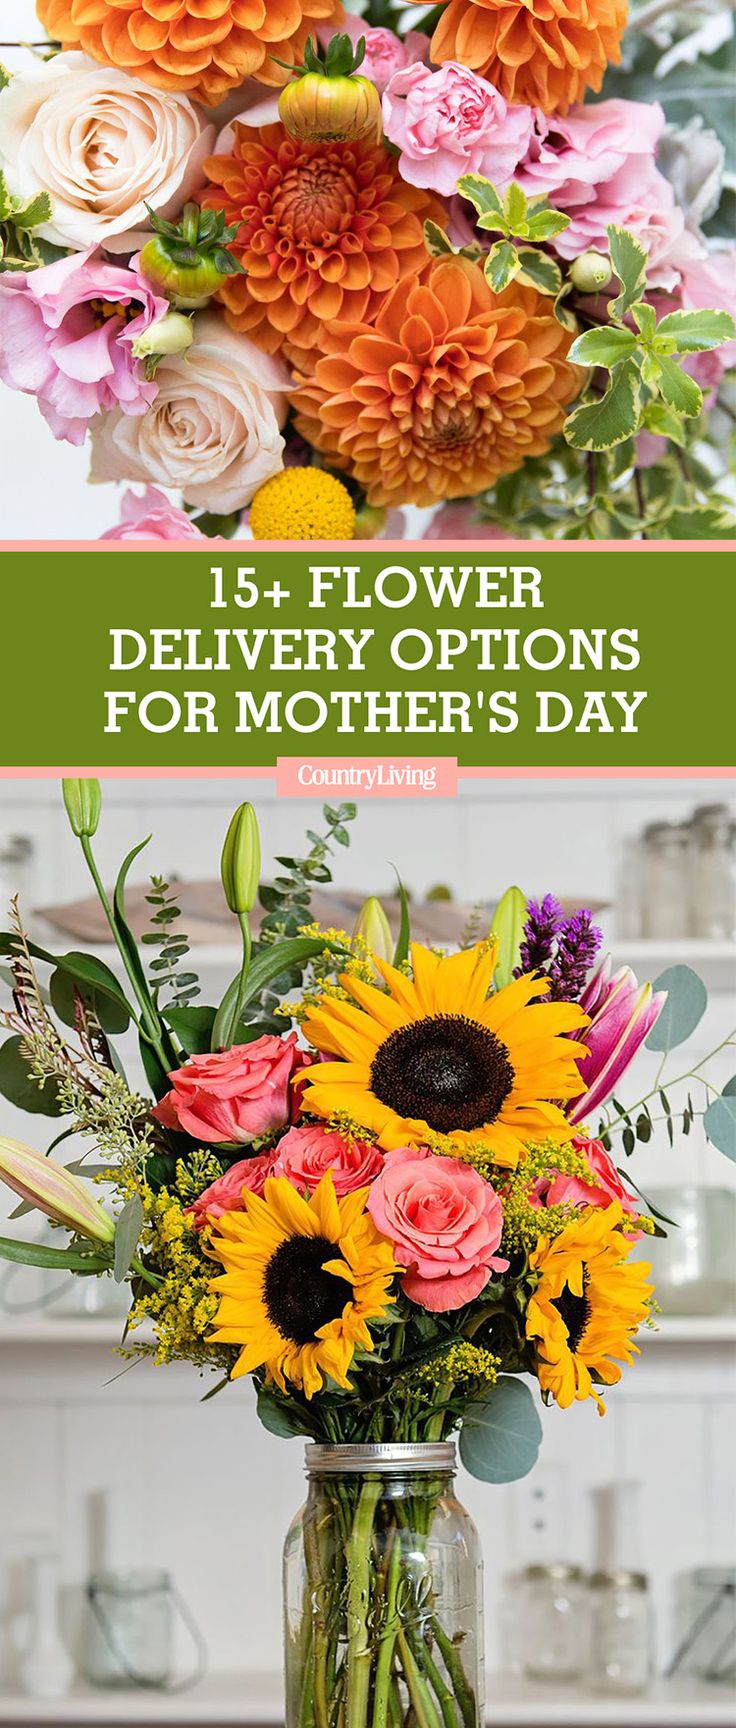 What better way to celebrate your mom on Mother's Day than with a bouquet of flo...